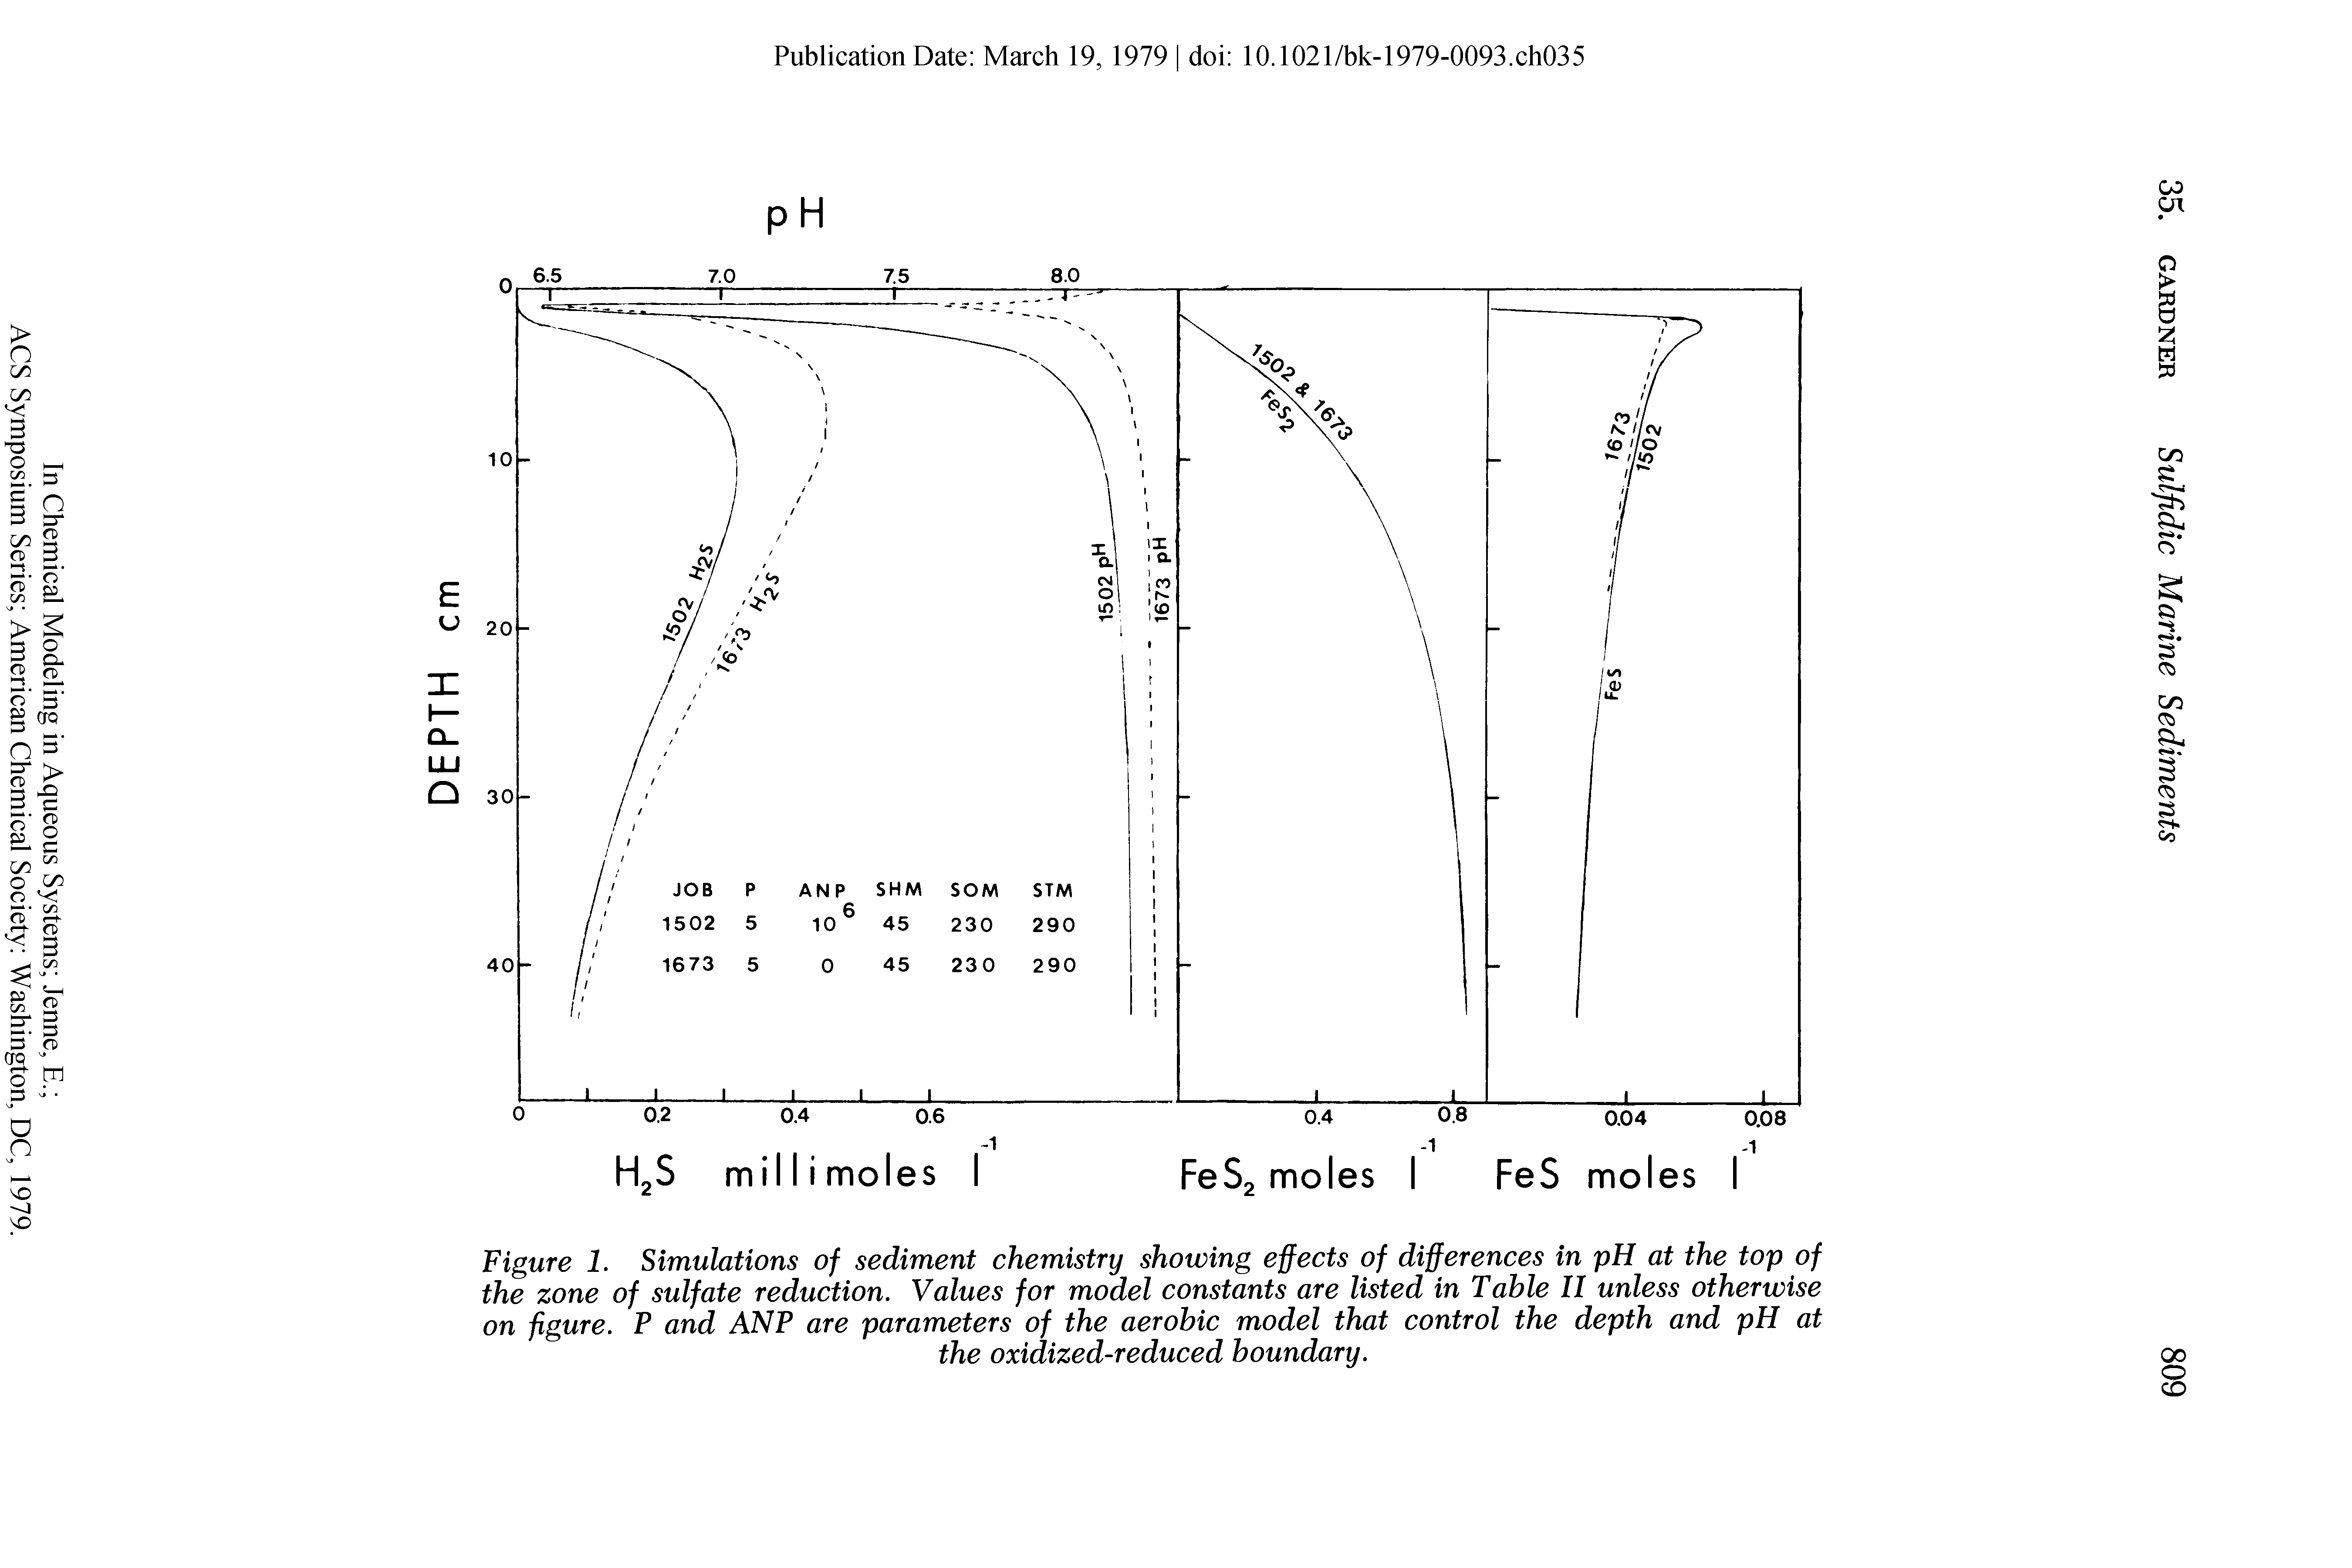 Figure 1. Simulations of sediment chemistry showing effects of differences in pH at the top of the zone of sulfate reduction. Values for model constants are listed in Table II unless otherwise on figure. P and ANP are parameters of the aerobic model that control the depth and pH at...